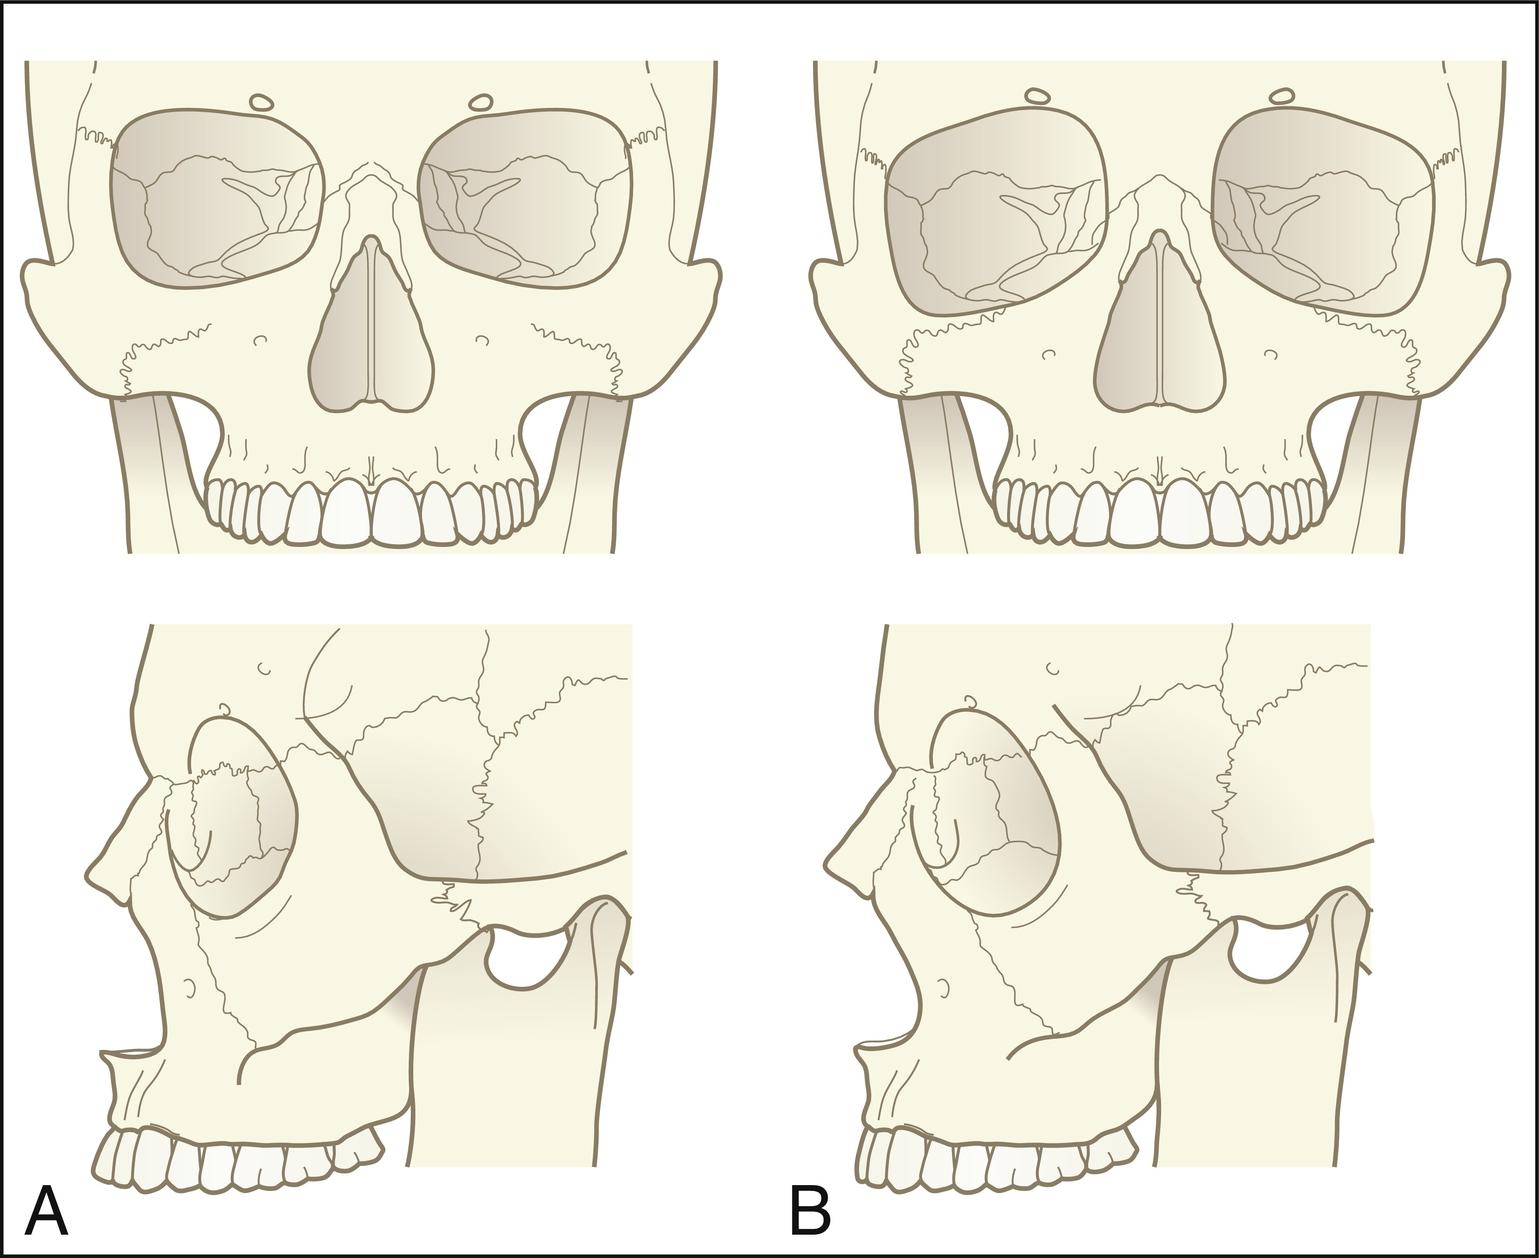 Fig. 10.5, A pictorial summary of age-related changes to the mid-face skeleton. (A) Features of a youthful skull include a malar eminence, infraorbital rim, and pyriform aperture that are positioned anterior and vertical in the sagittal plane. The orbital aperture is small with a horizontally positioned inferior orbital rim. (B) Older patients have a retroclined malar eminence, infraorbital rim, and pyriform aperture compared with that of young patients. The orbital aperture area is increased secondary to progressive curve distortion of the orbital rim superomedially and inferolaterally.